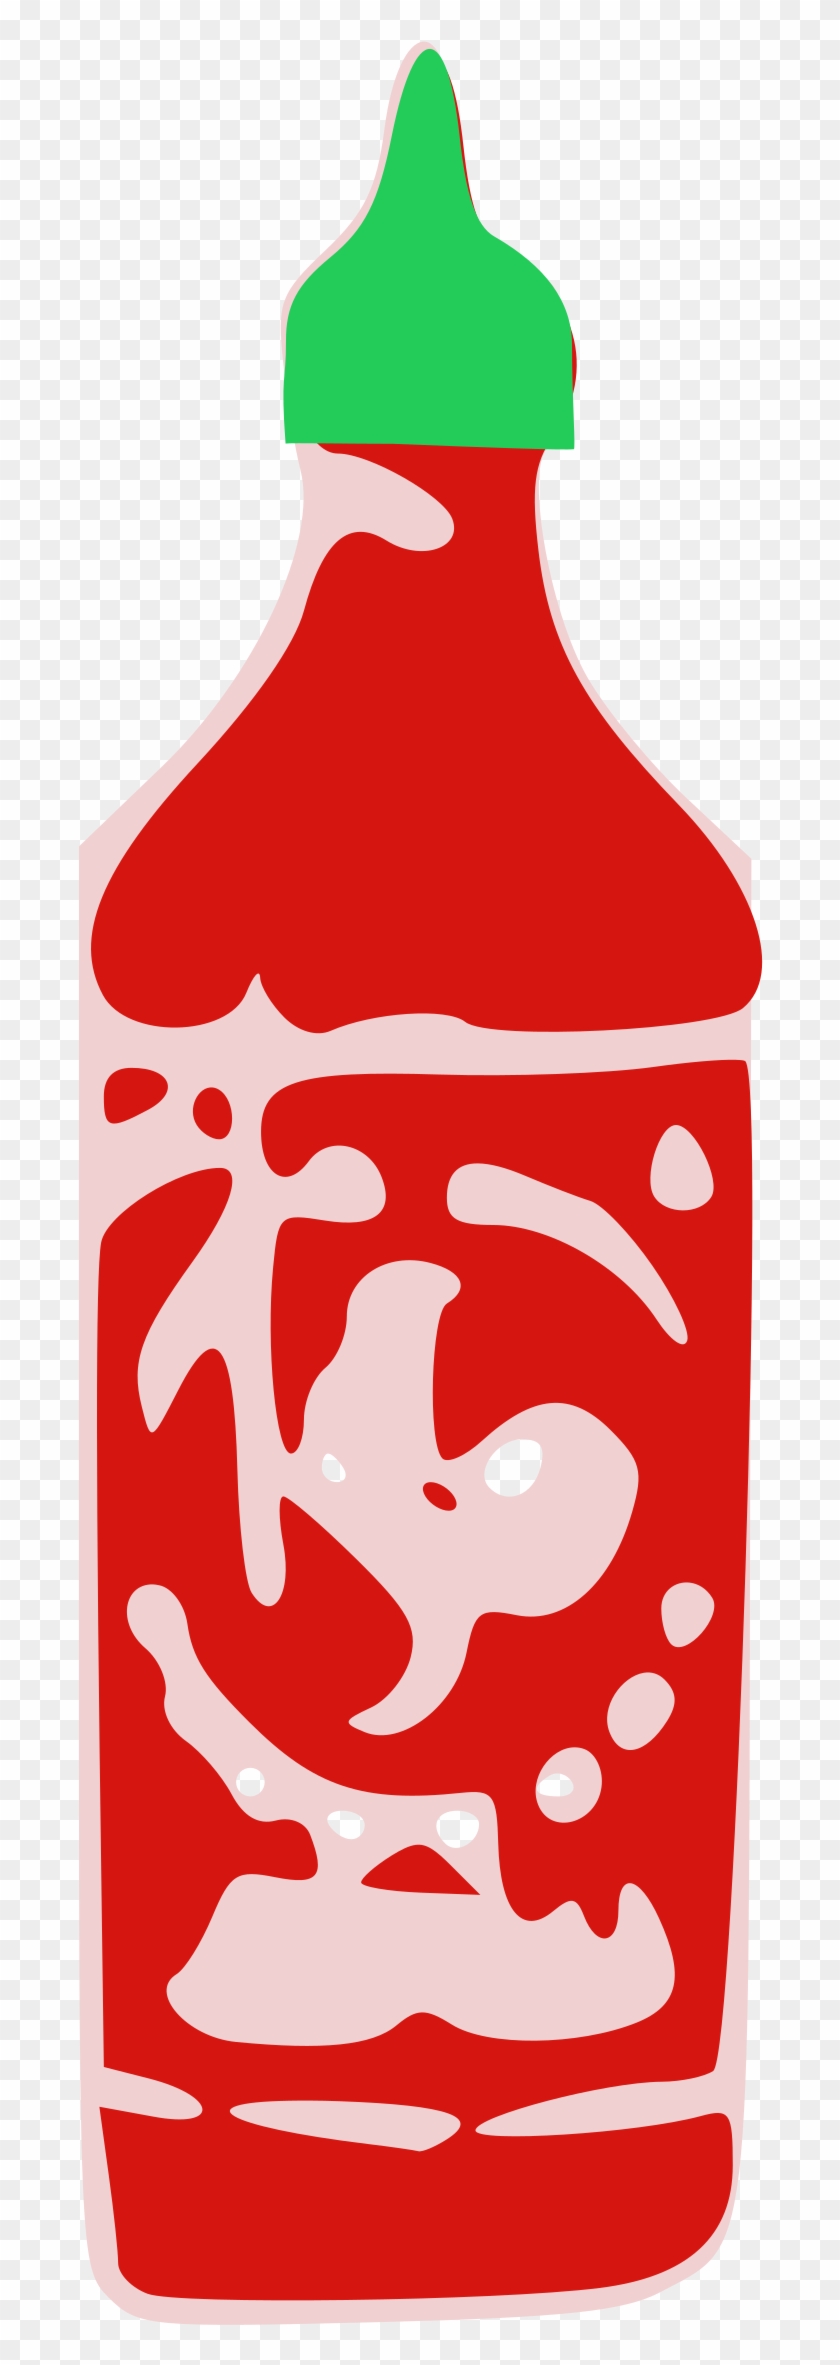 This Free Icons Png Design Of Hot Sauce Clipart #795477